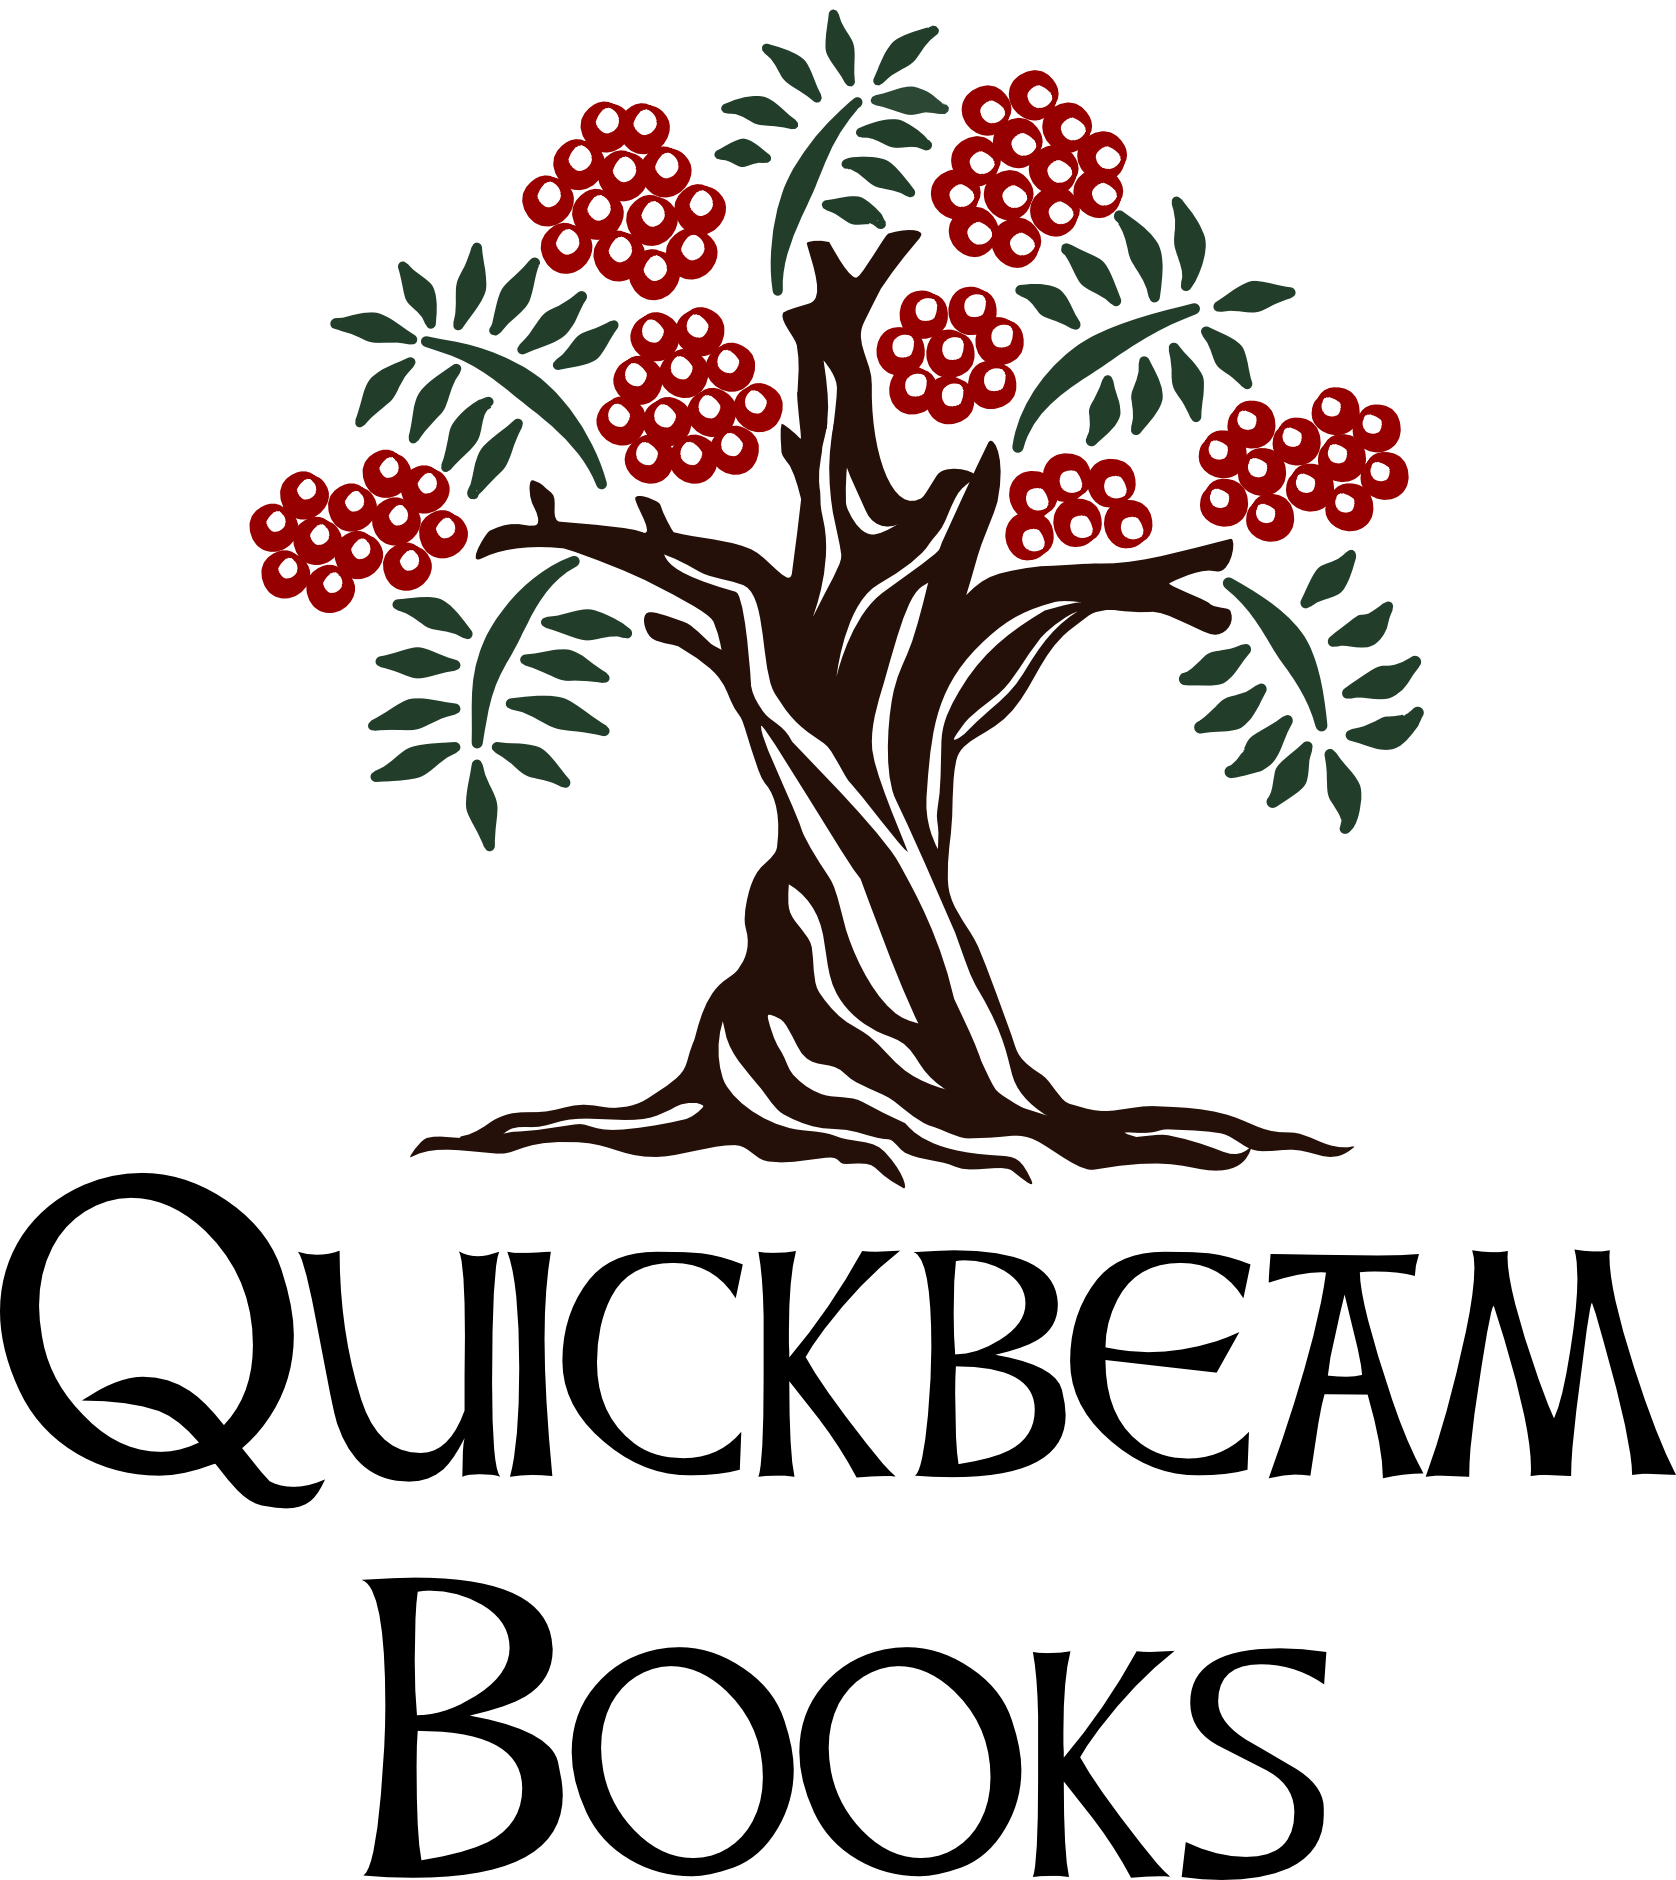 Logo for Quickbeam Books: A stylized quickbeam, or rowan, tree in brown with green leaves and red rowan berries on the branches.